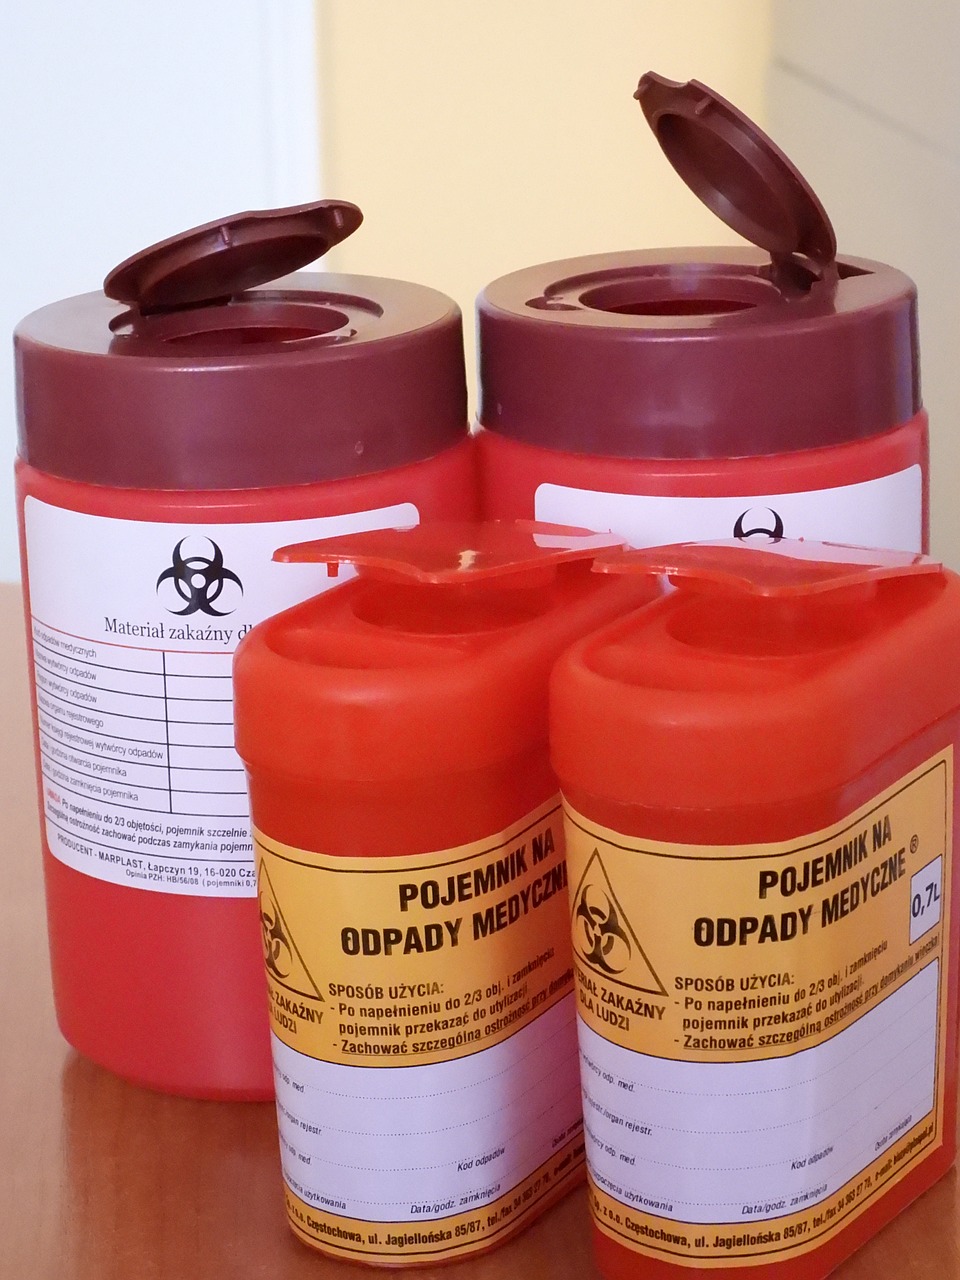 containers for medical waste  medical  health service free photo